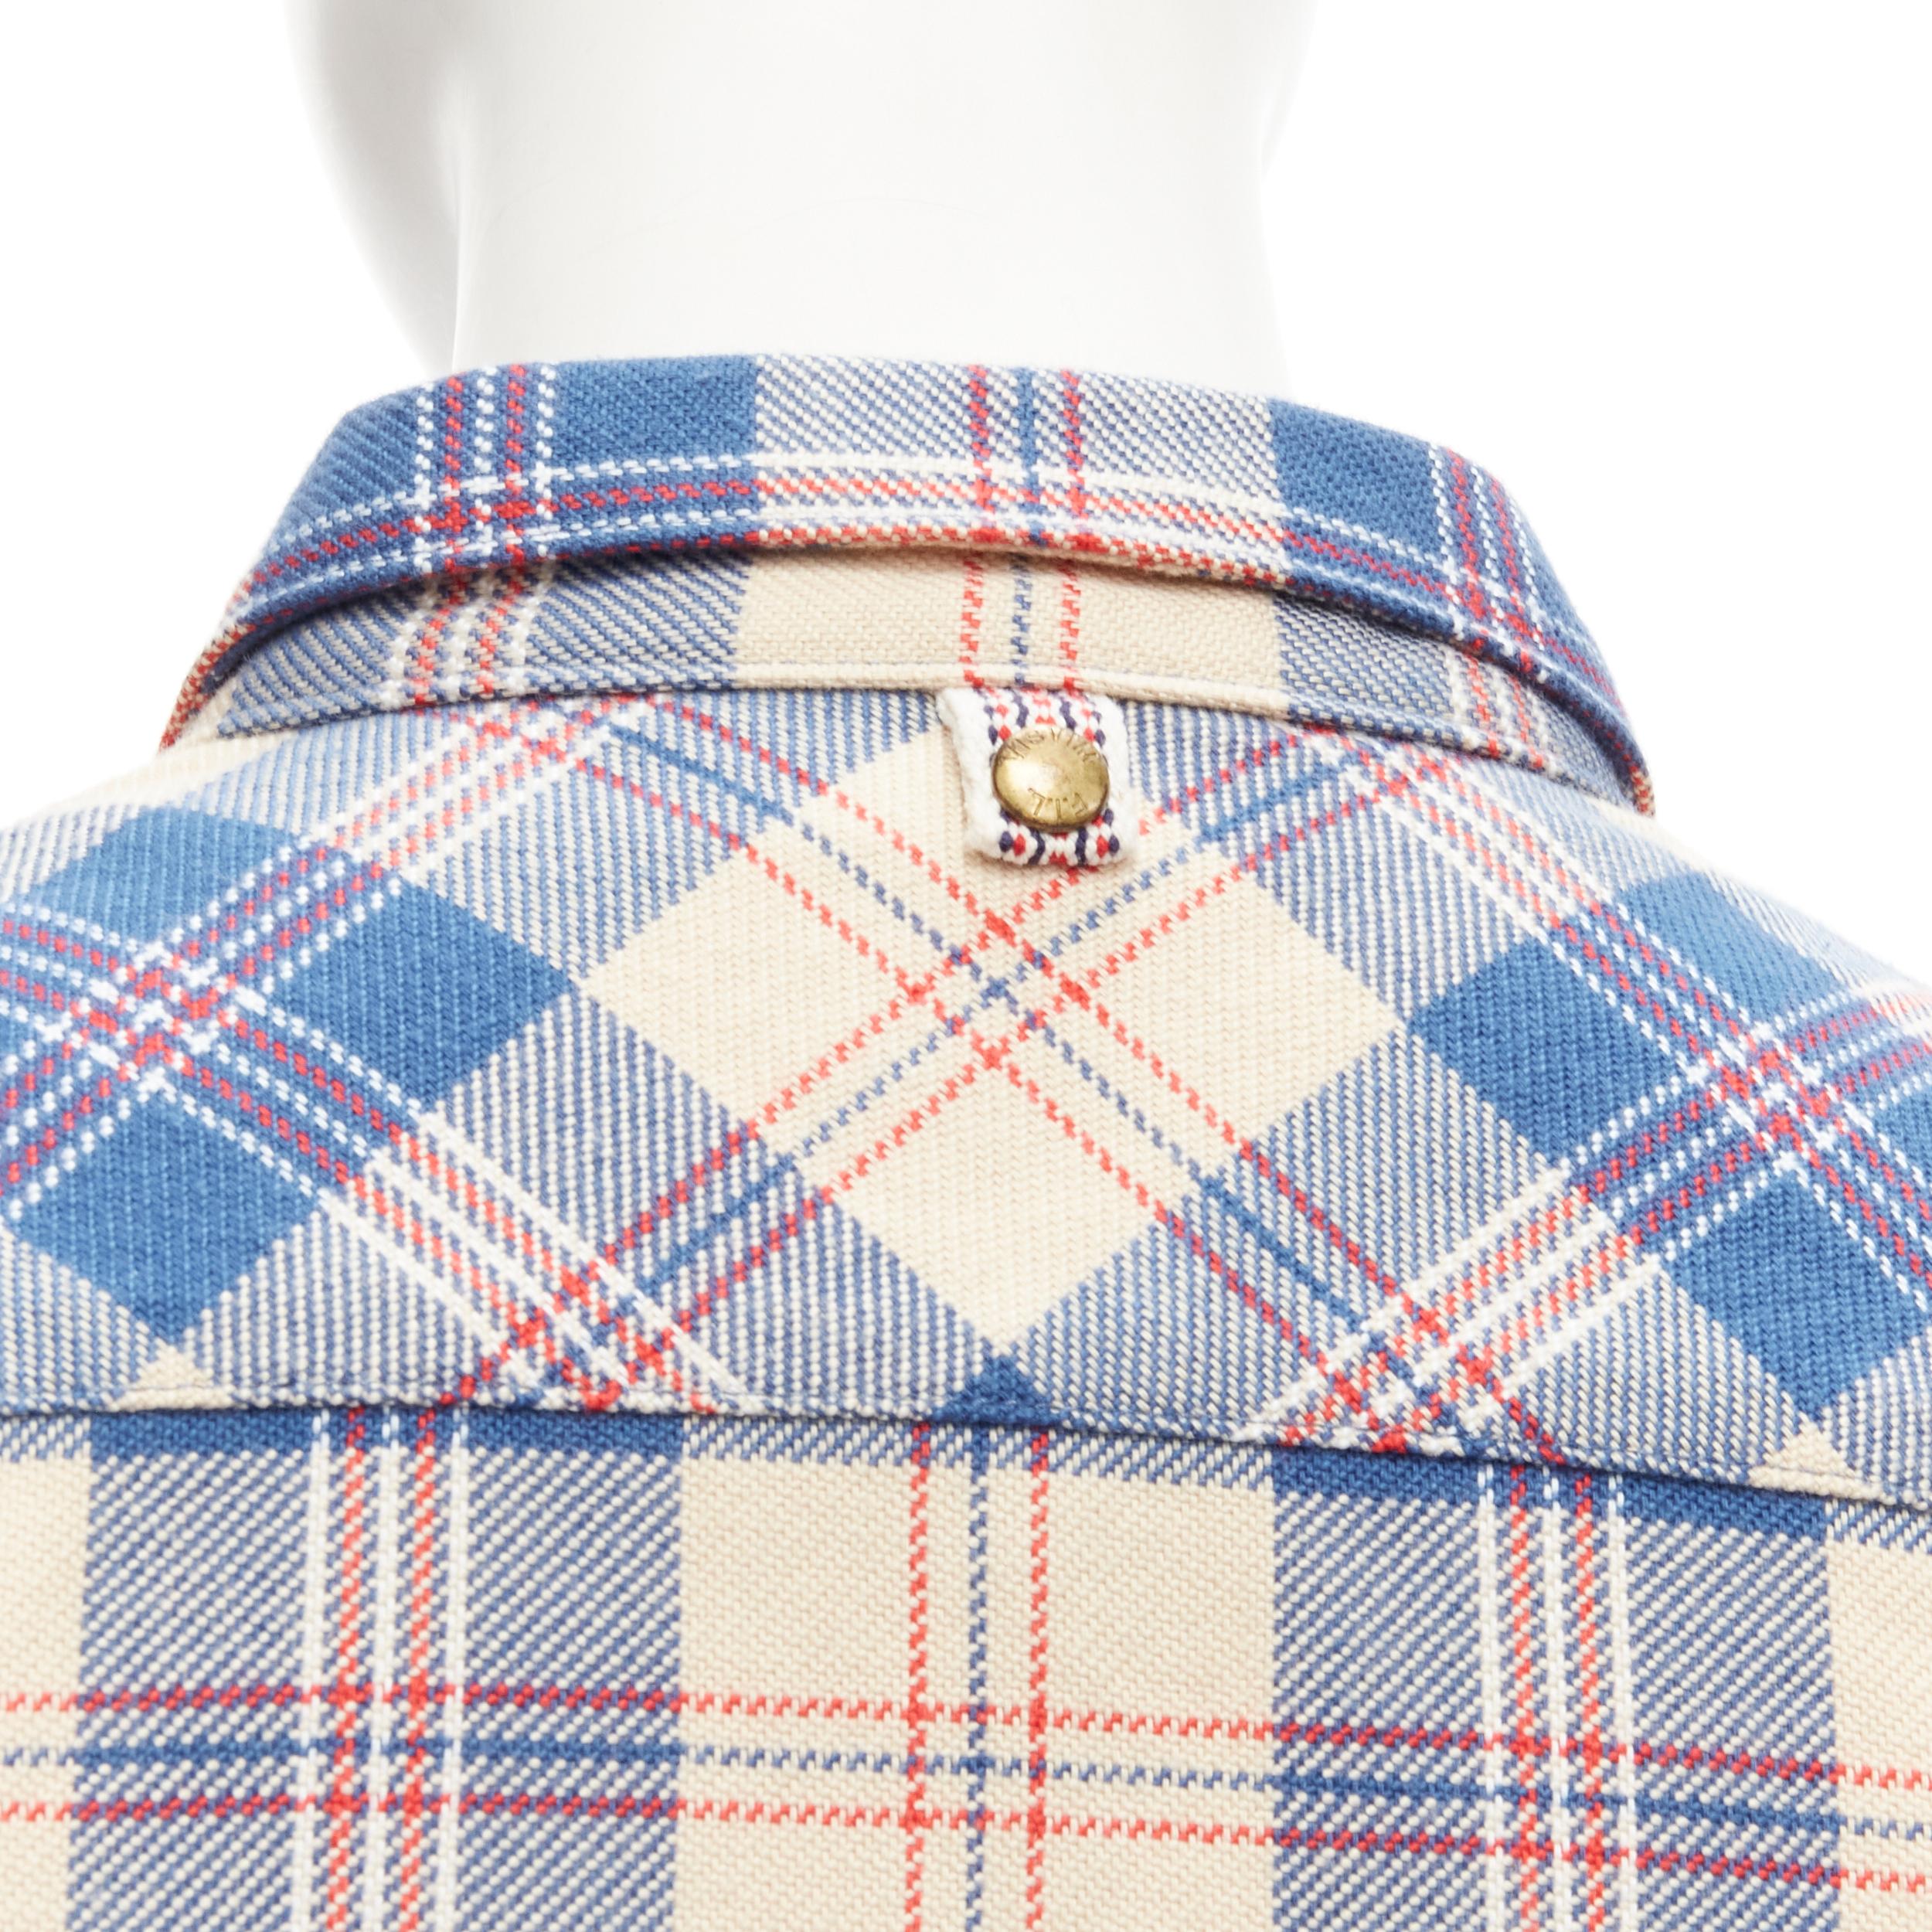 VISVIM cotton blue beige plaid flap pockets button down shirt JP0 XS
Reference: YNWG/A00125
Brand: Visvim
Material: Cotton, Linen
Color: Blue, Beige
Pattern: Plaid
Closure: Button
Made in: Japan

CONDITION:
Condition: Excellent, this item was